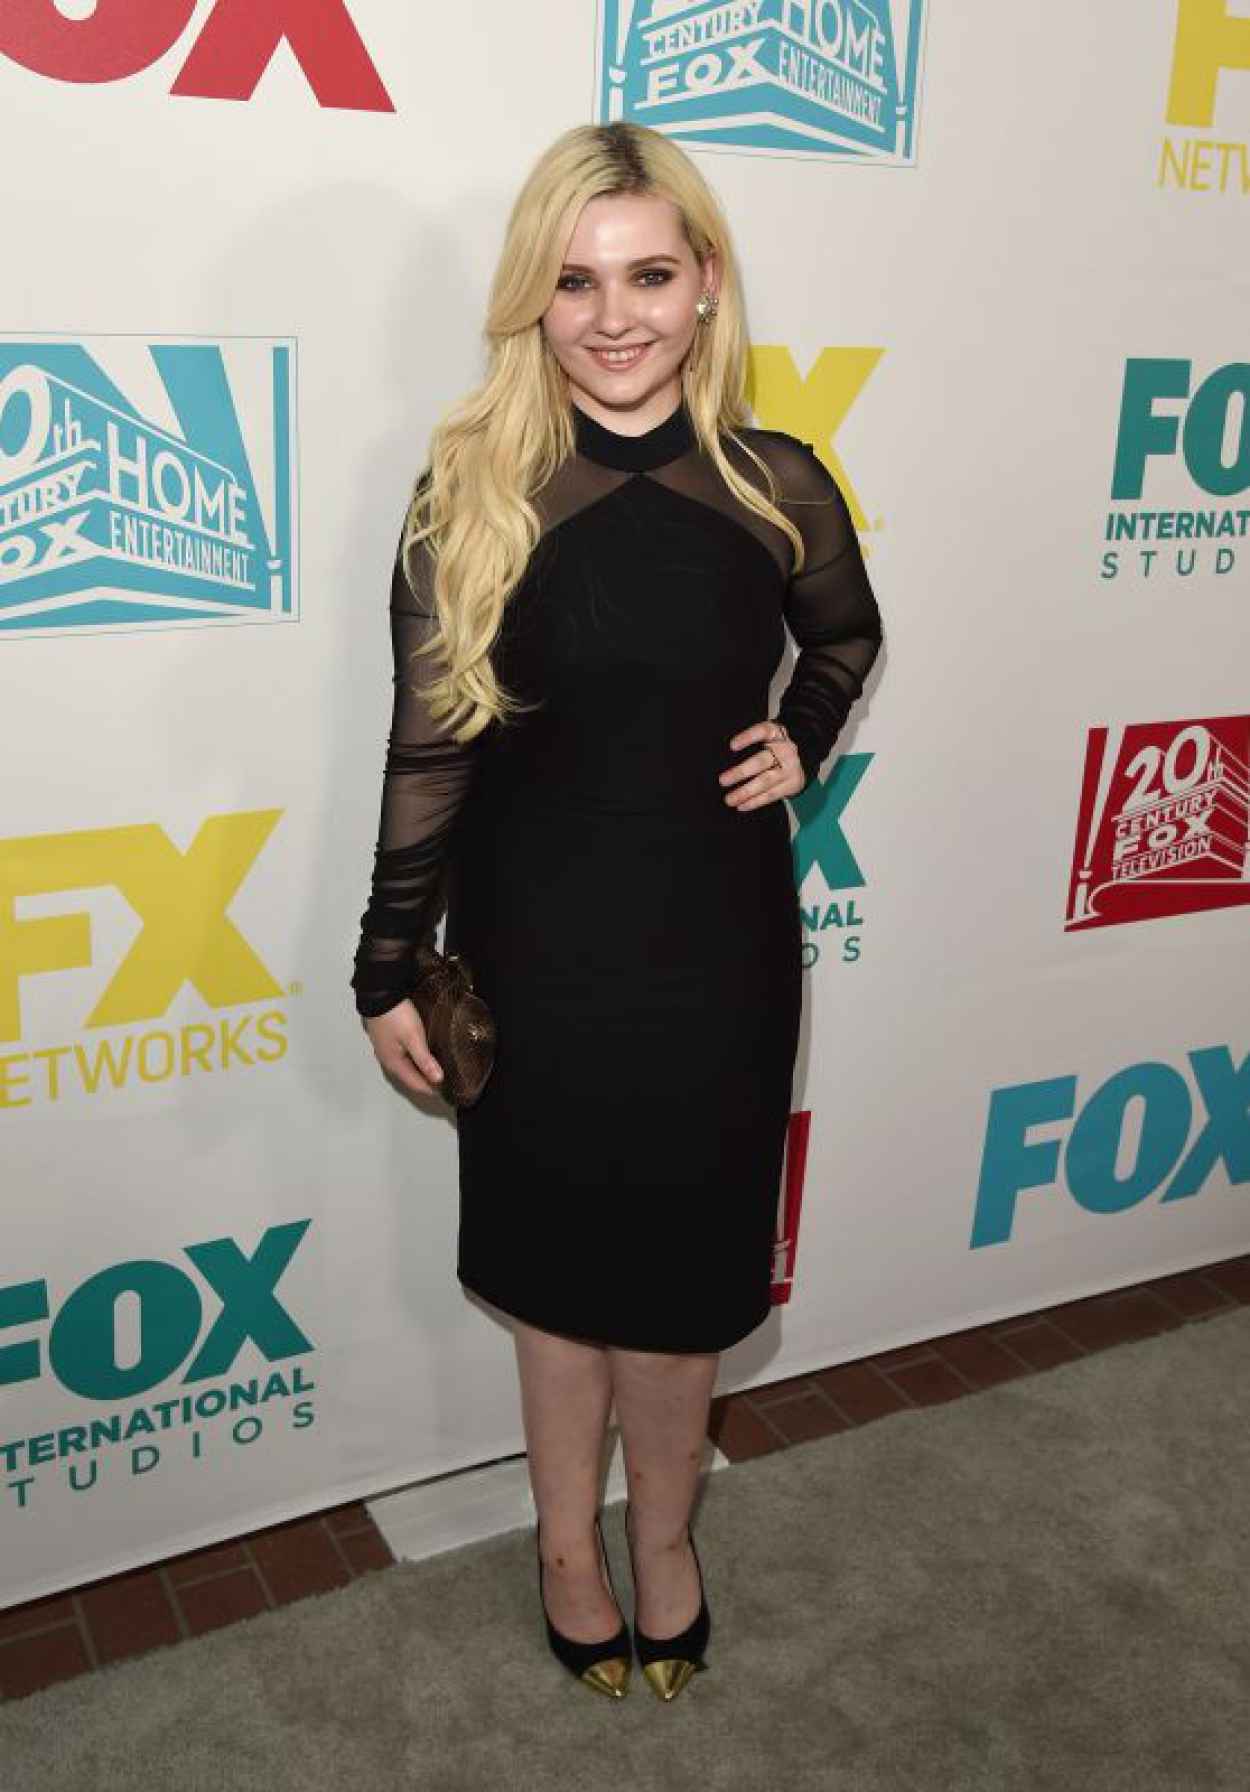 Abigail Breslin - 20th Century Fox Party at Comic Con in San Diego, July 2015-1